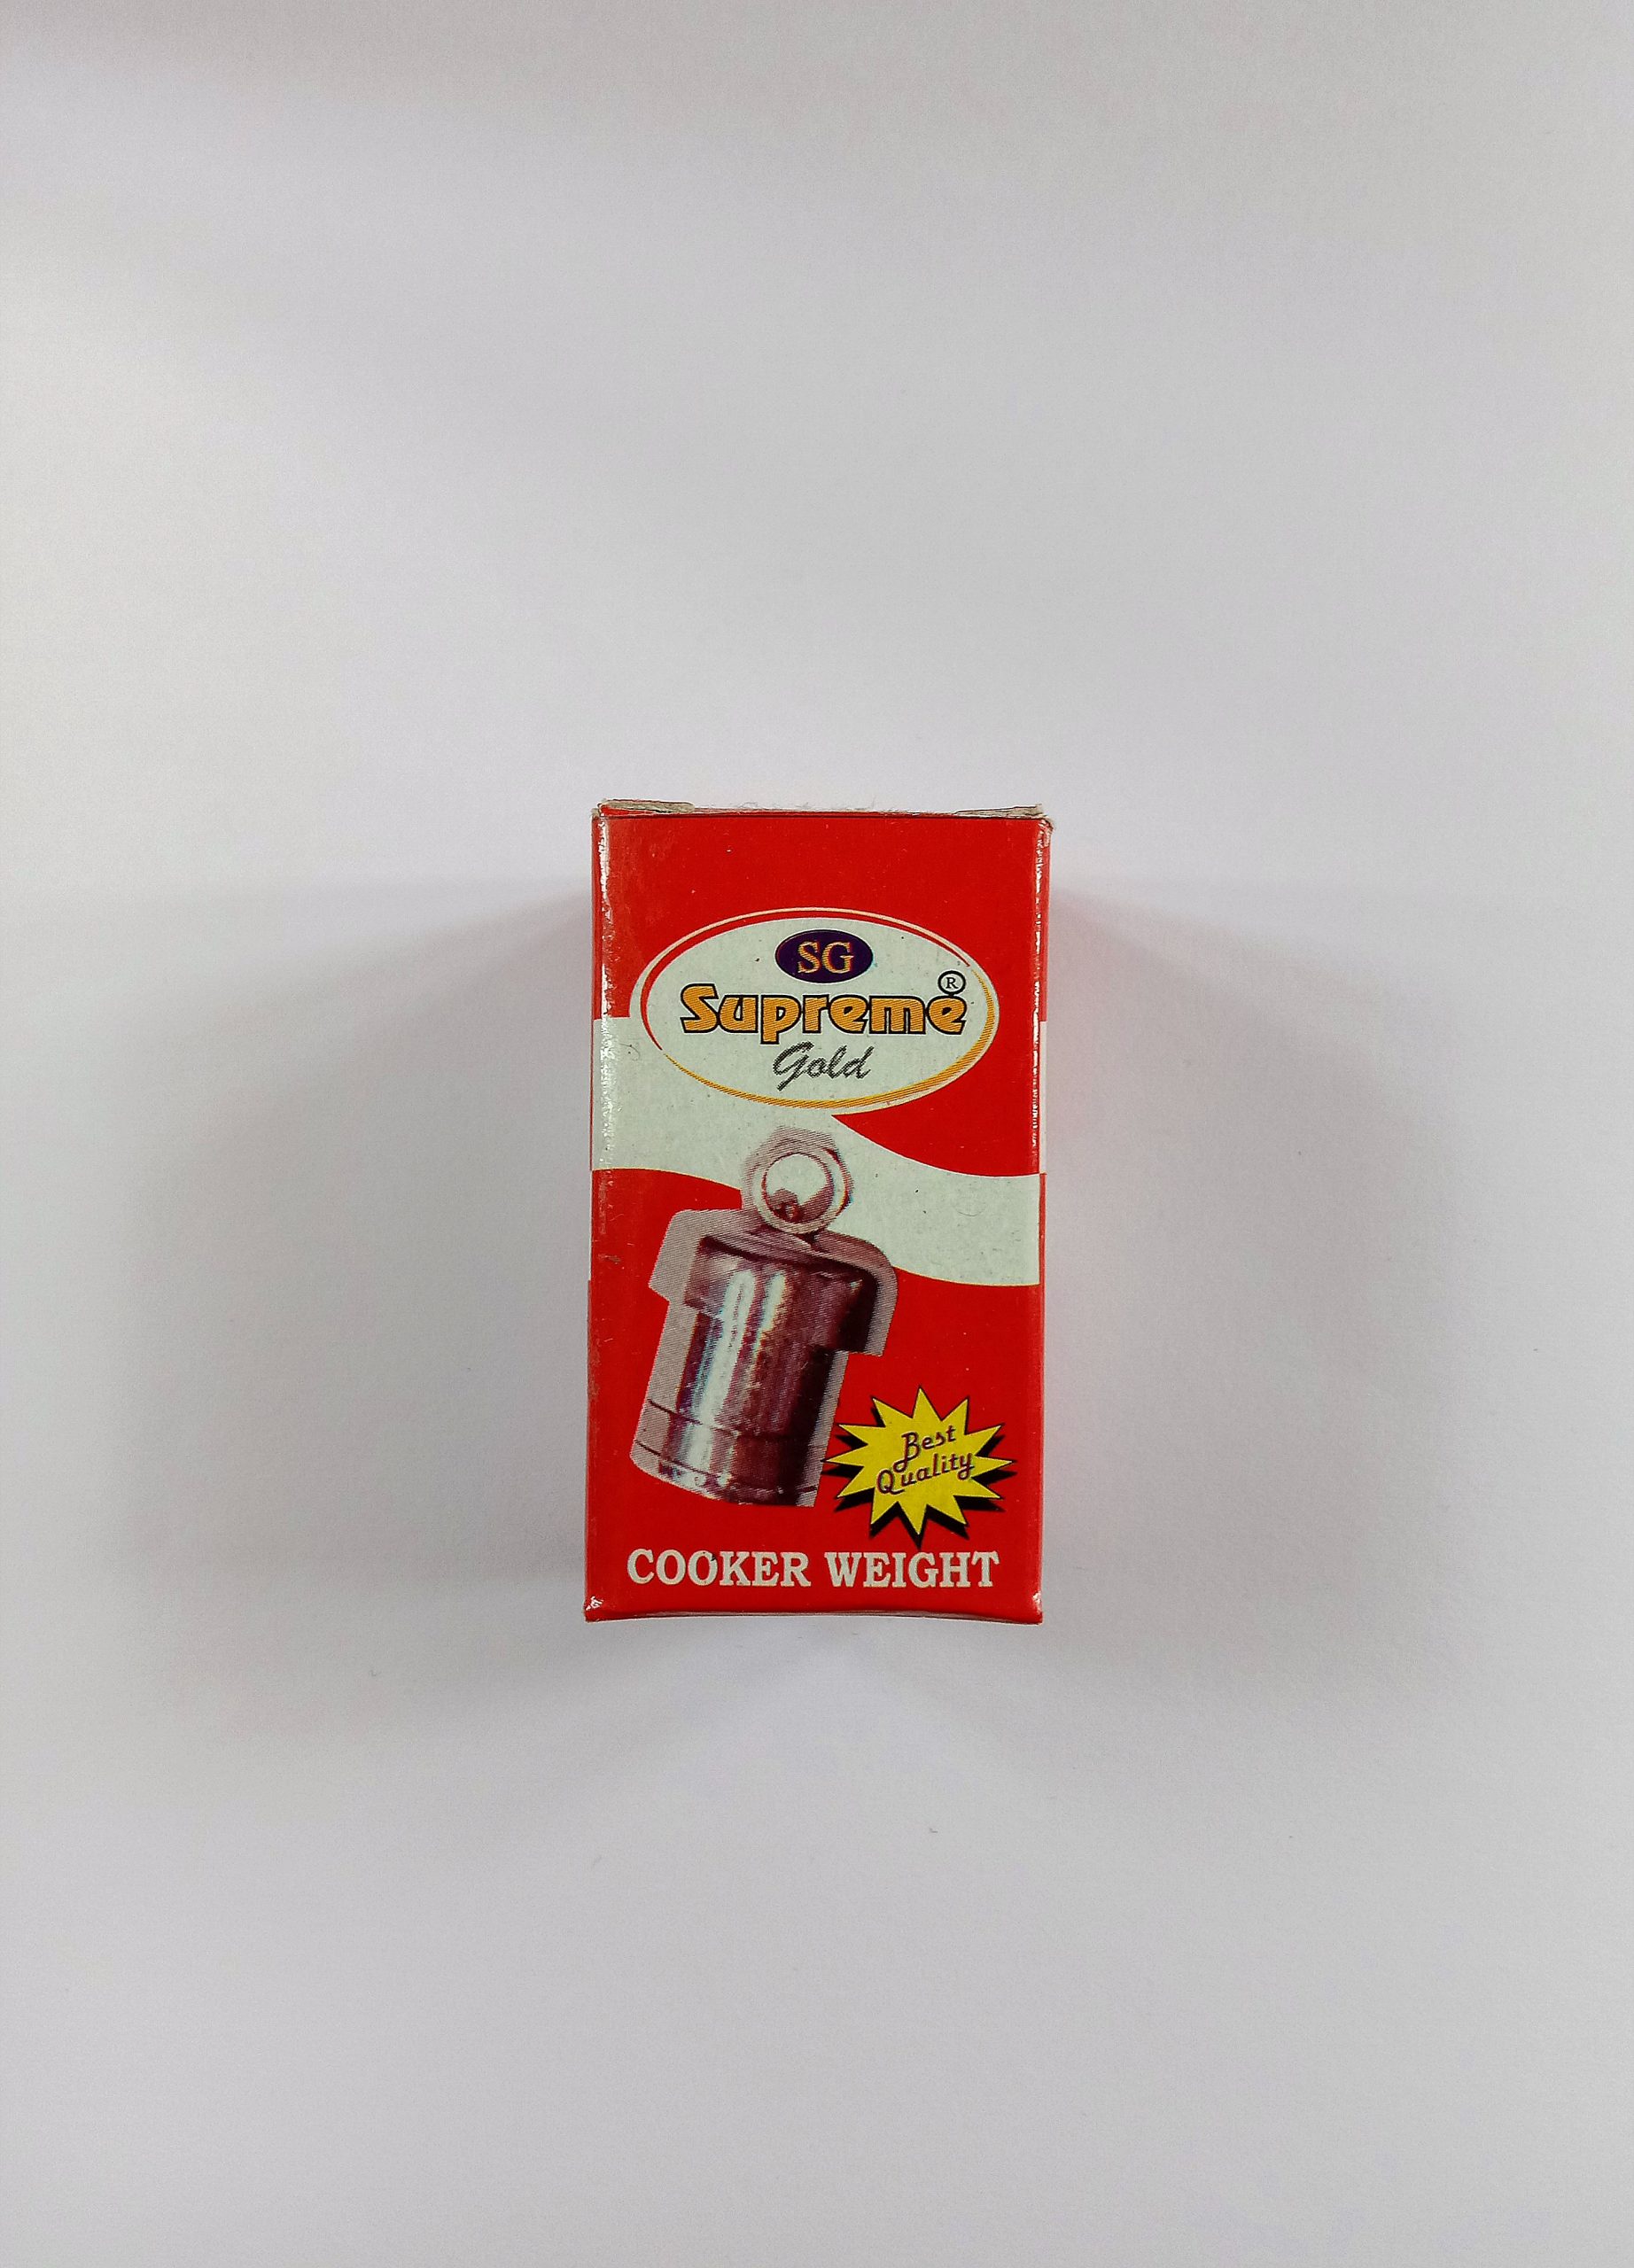 A pack of pressure cooker weight